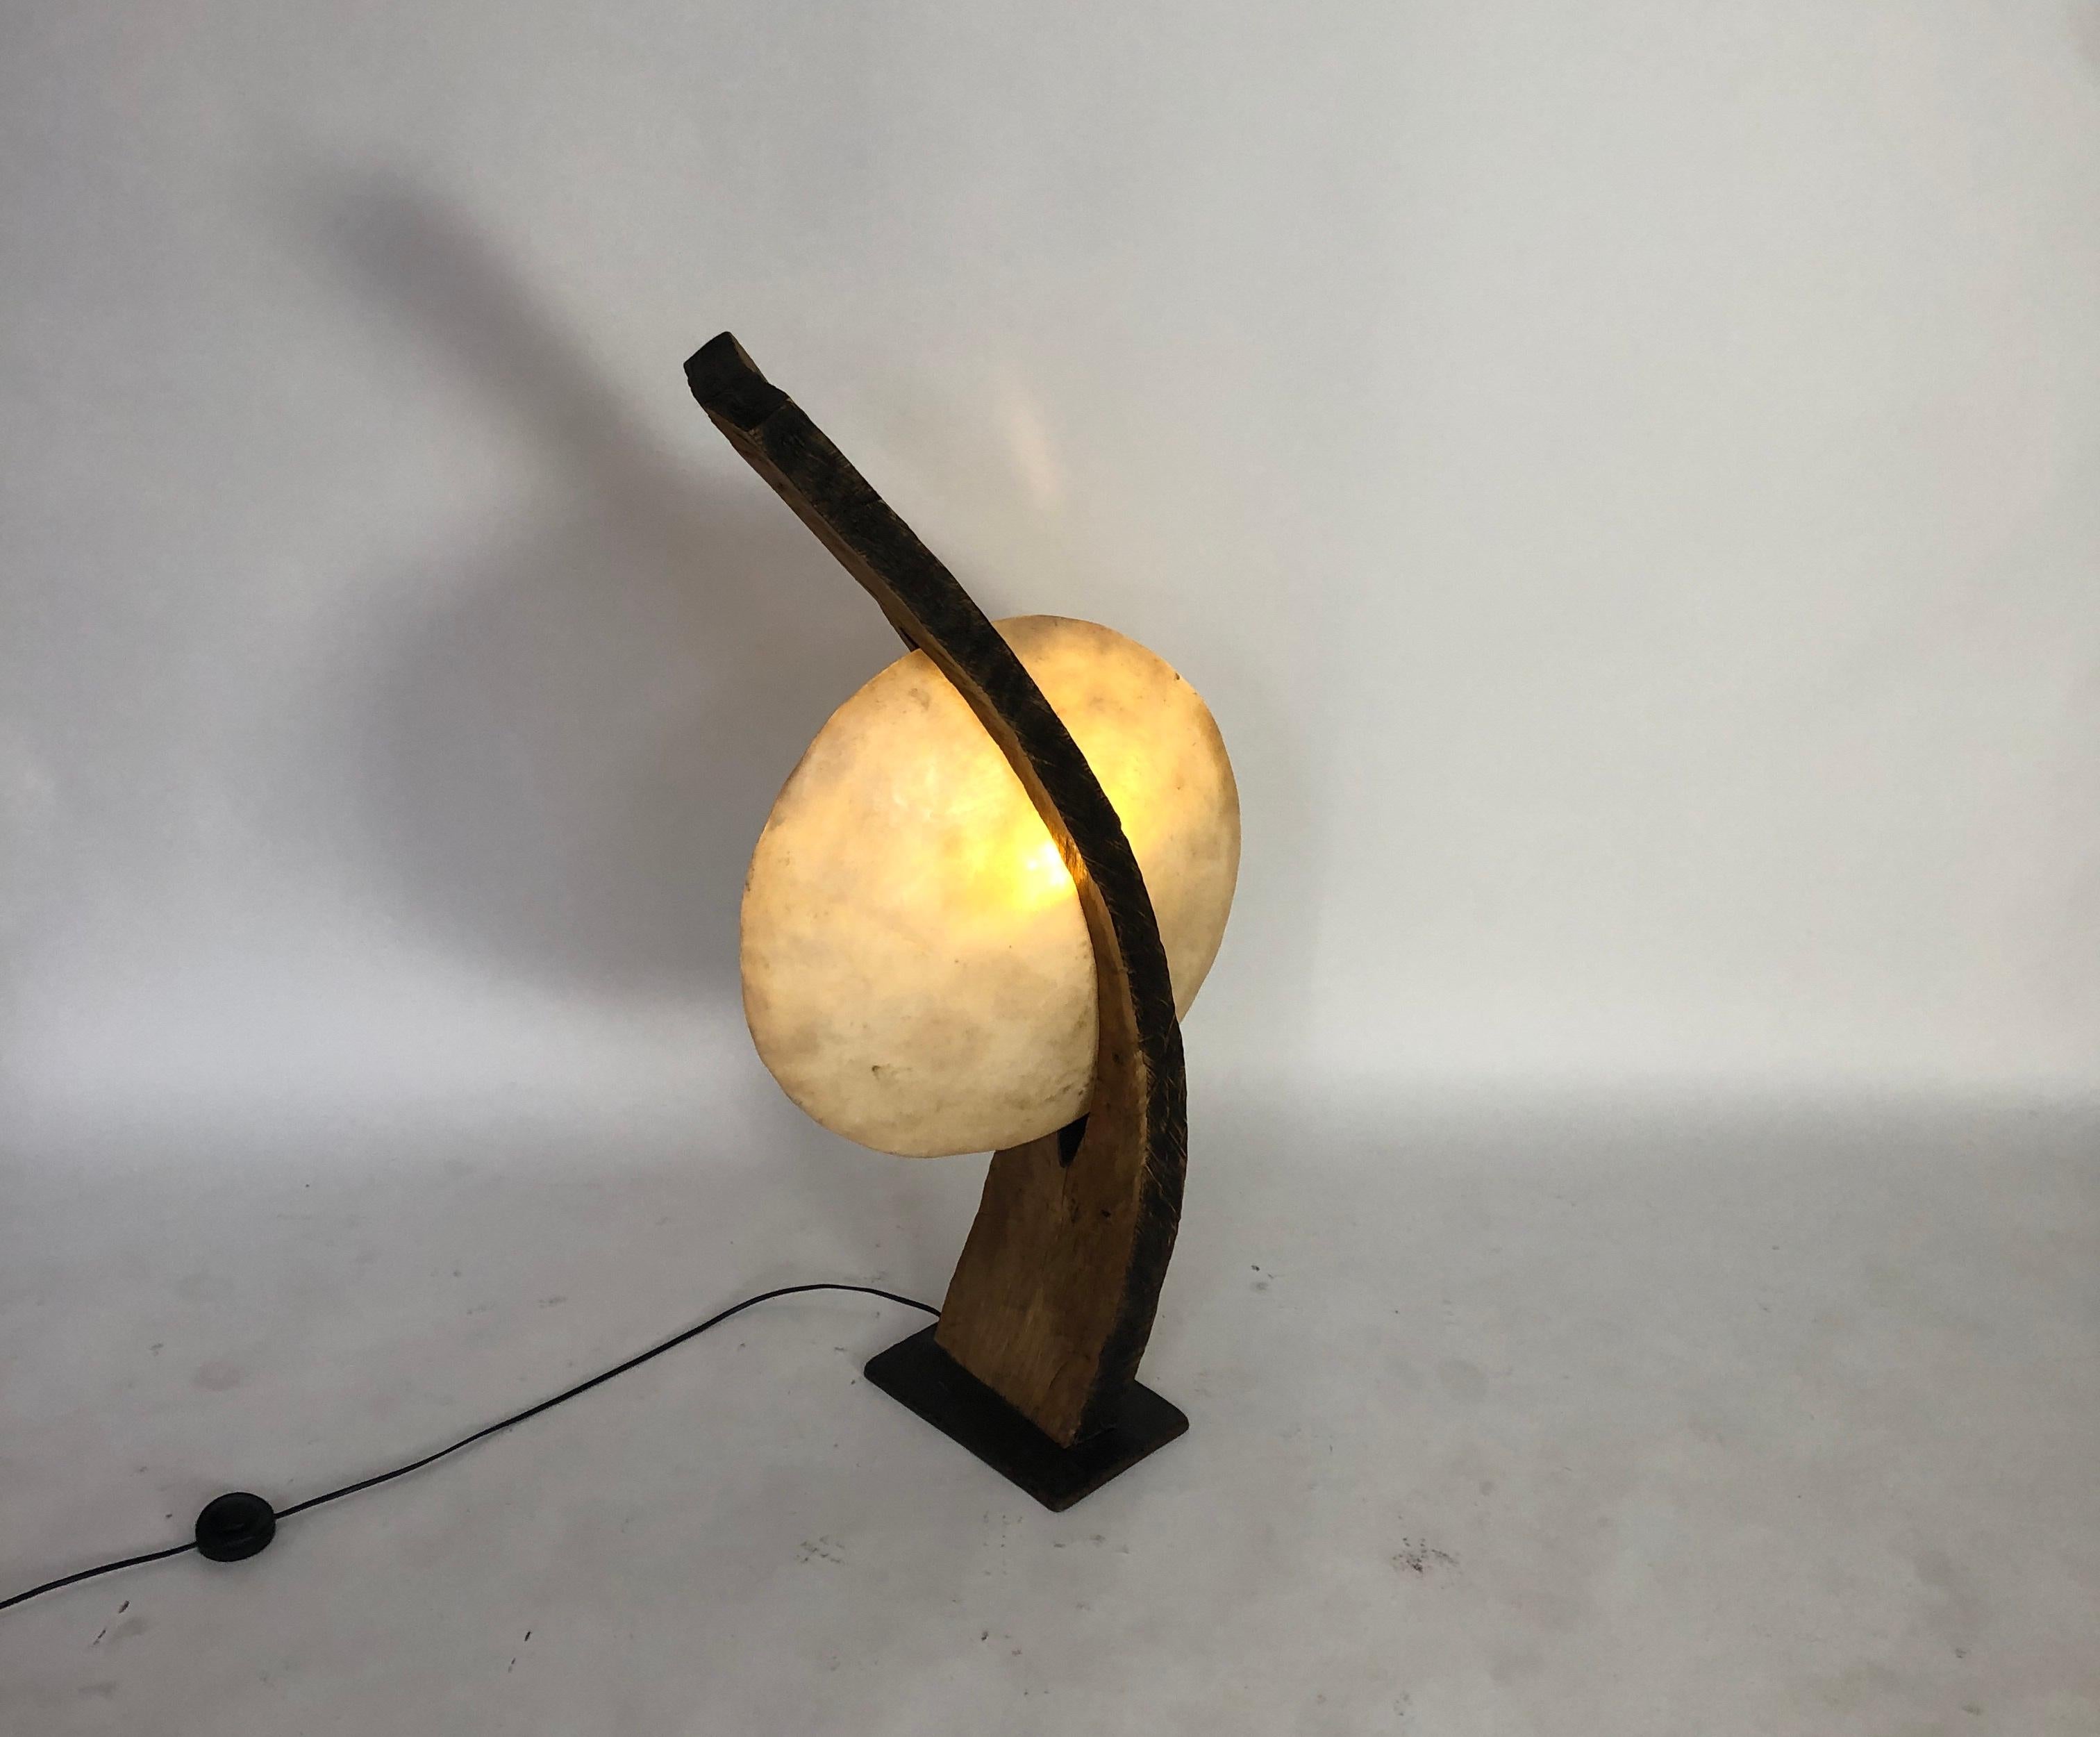 This one of a kind creation by Jerome Pocheron is crafted by a massive bent slap of wood, which is fitting with a convex disc. The disc is made of a resin composition which conceals the light bulb within. The soft light which is given off make is a